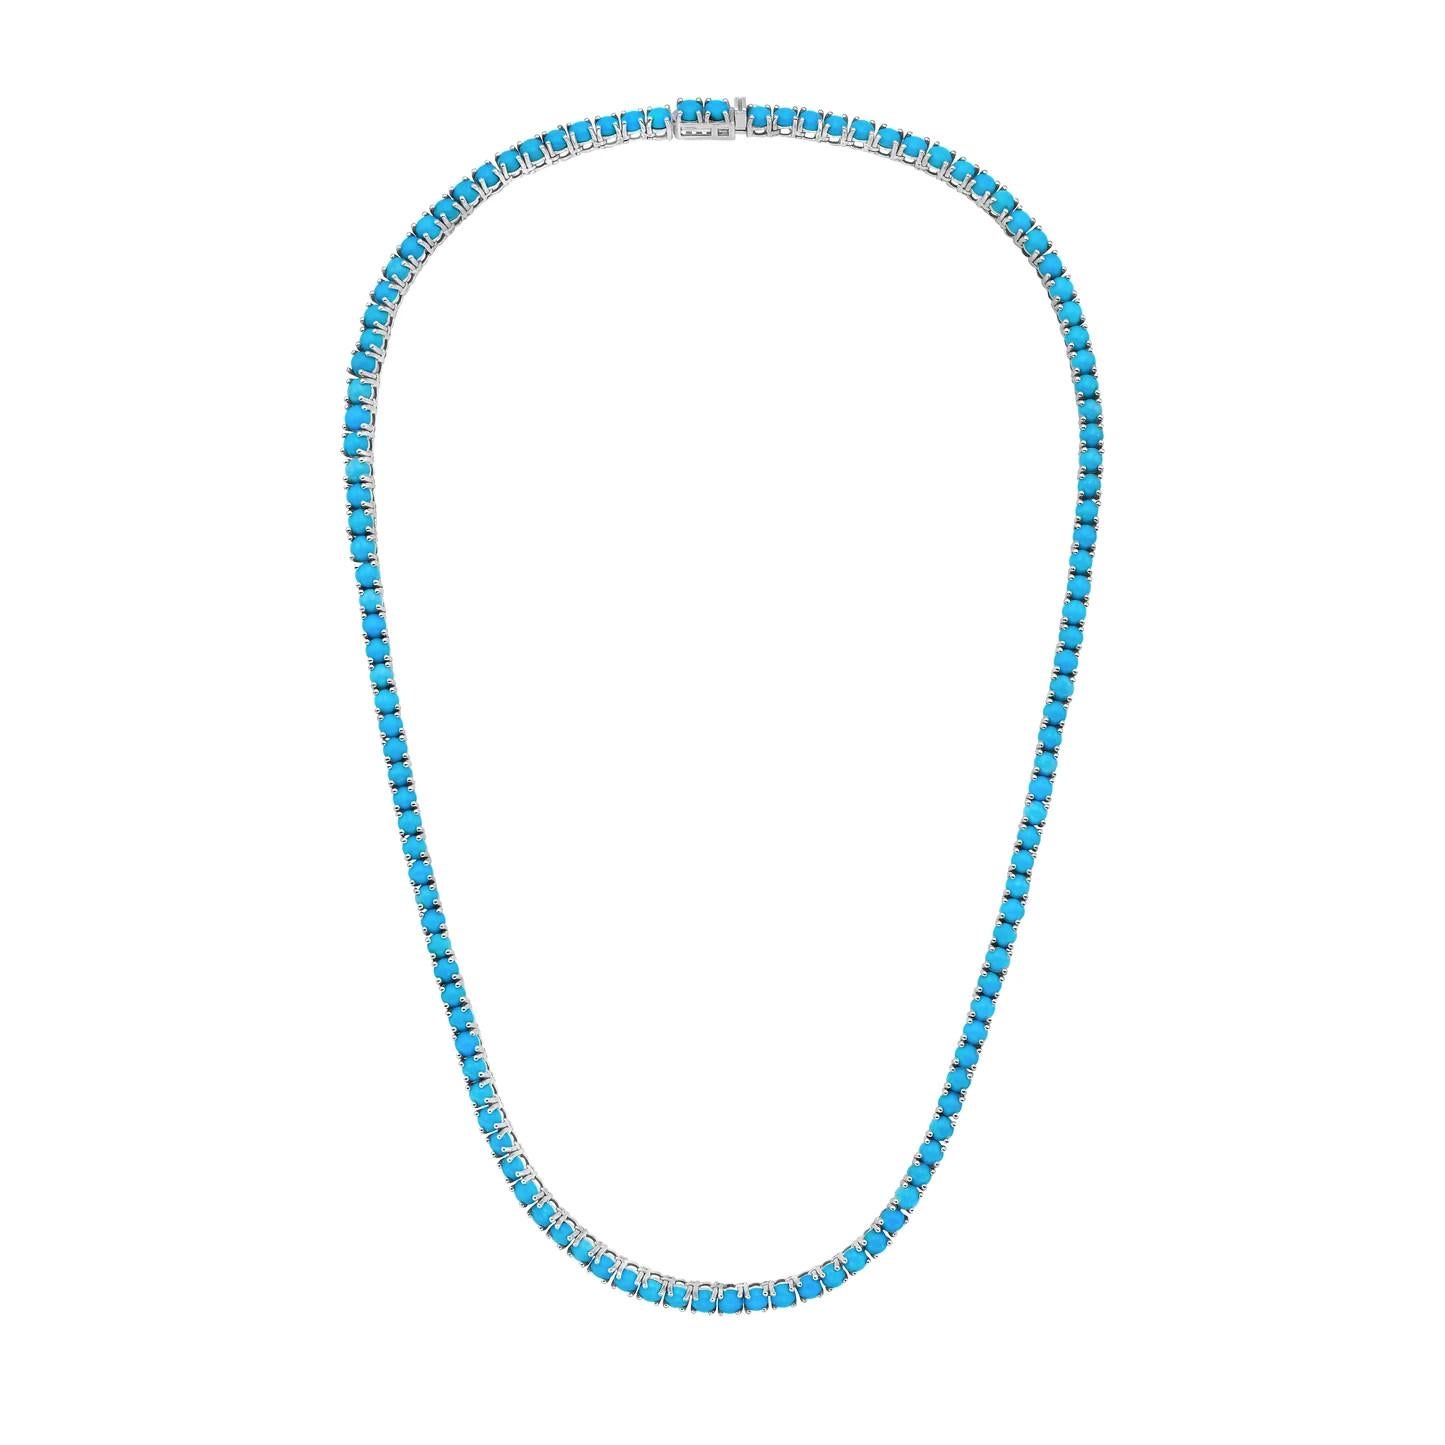 Cabochon Turquoise Necklace 16.64 Carats 14K White Gold For Sale